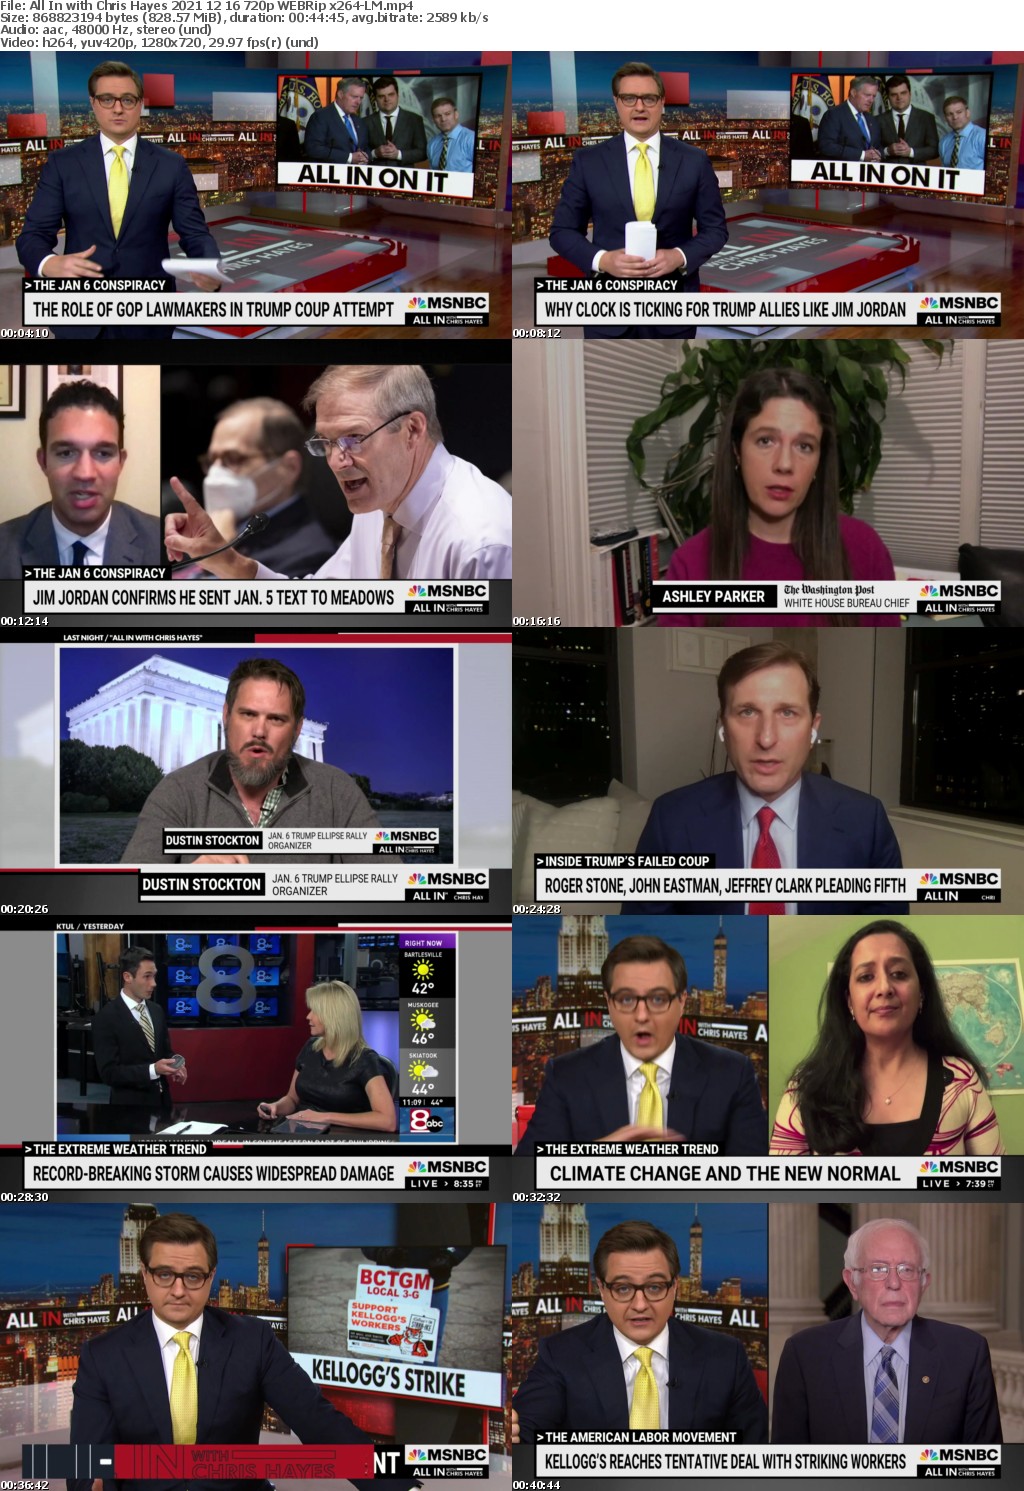 All In with Chris Hayes 2021 12 16 720p WEBRip x264-LM